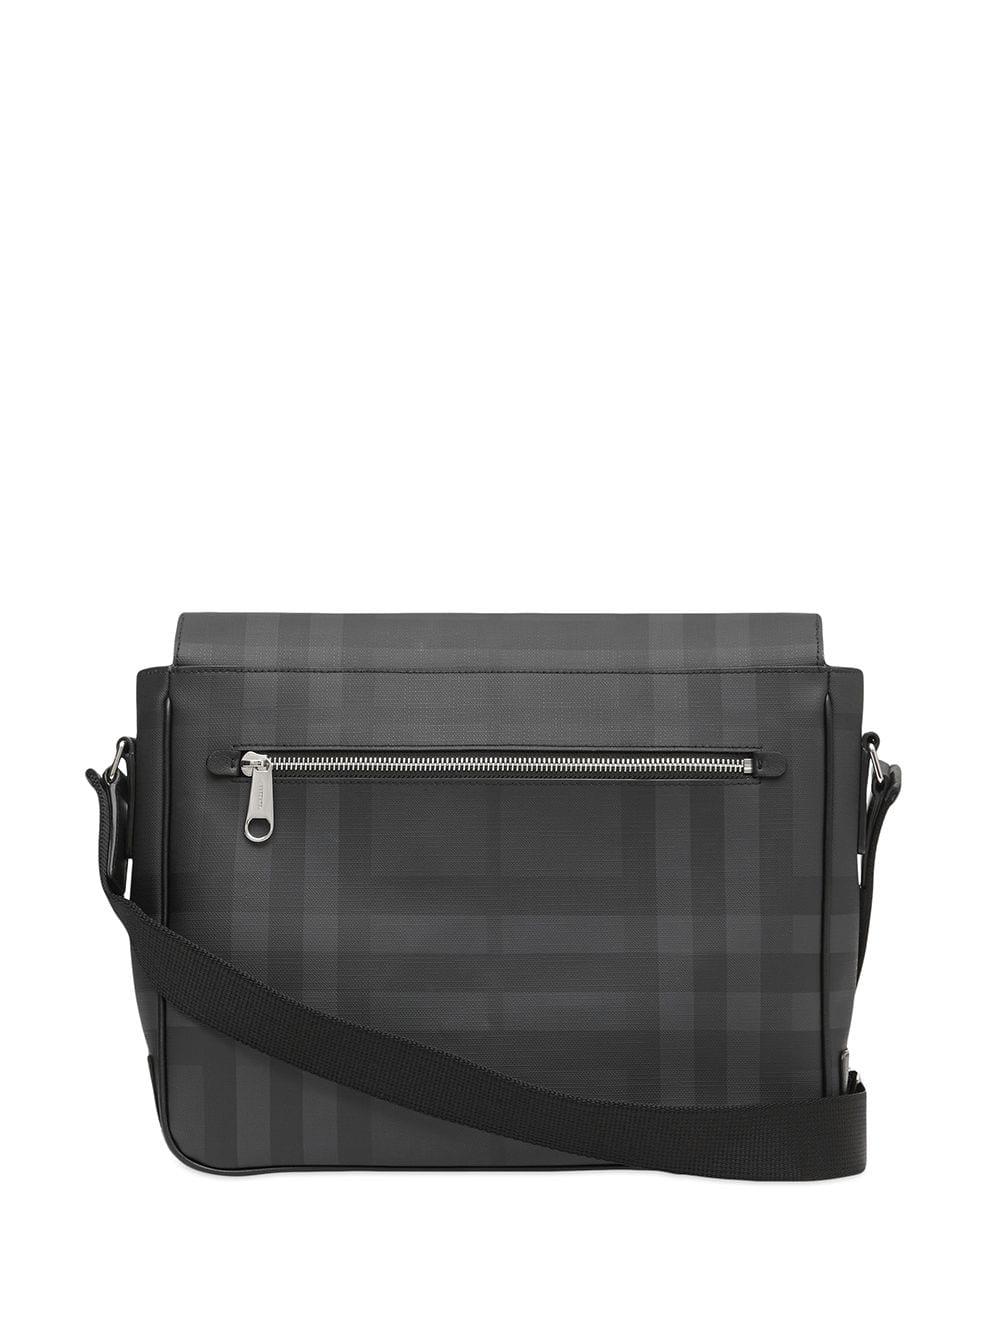 Burberry London Check And Leather Satchel in Dark Charcoal (Gray) for Men |  Lyst